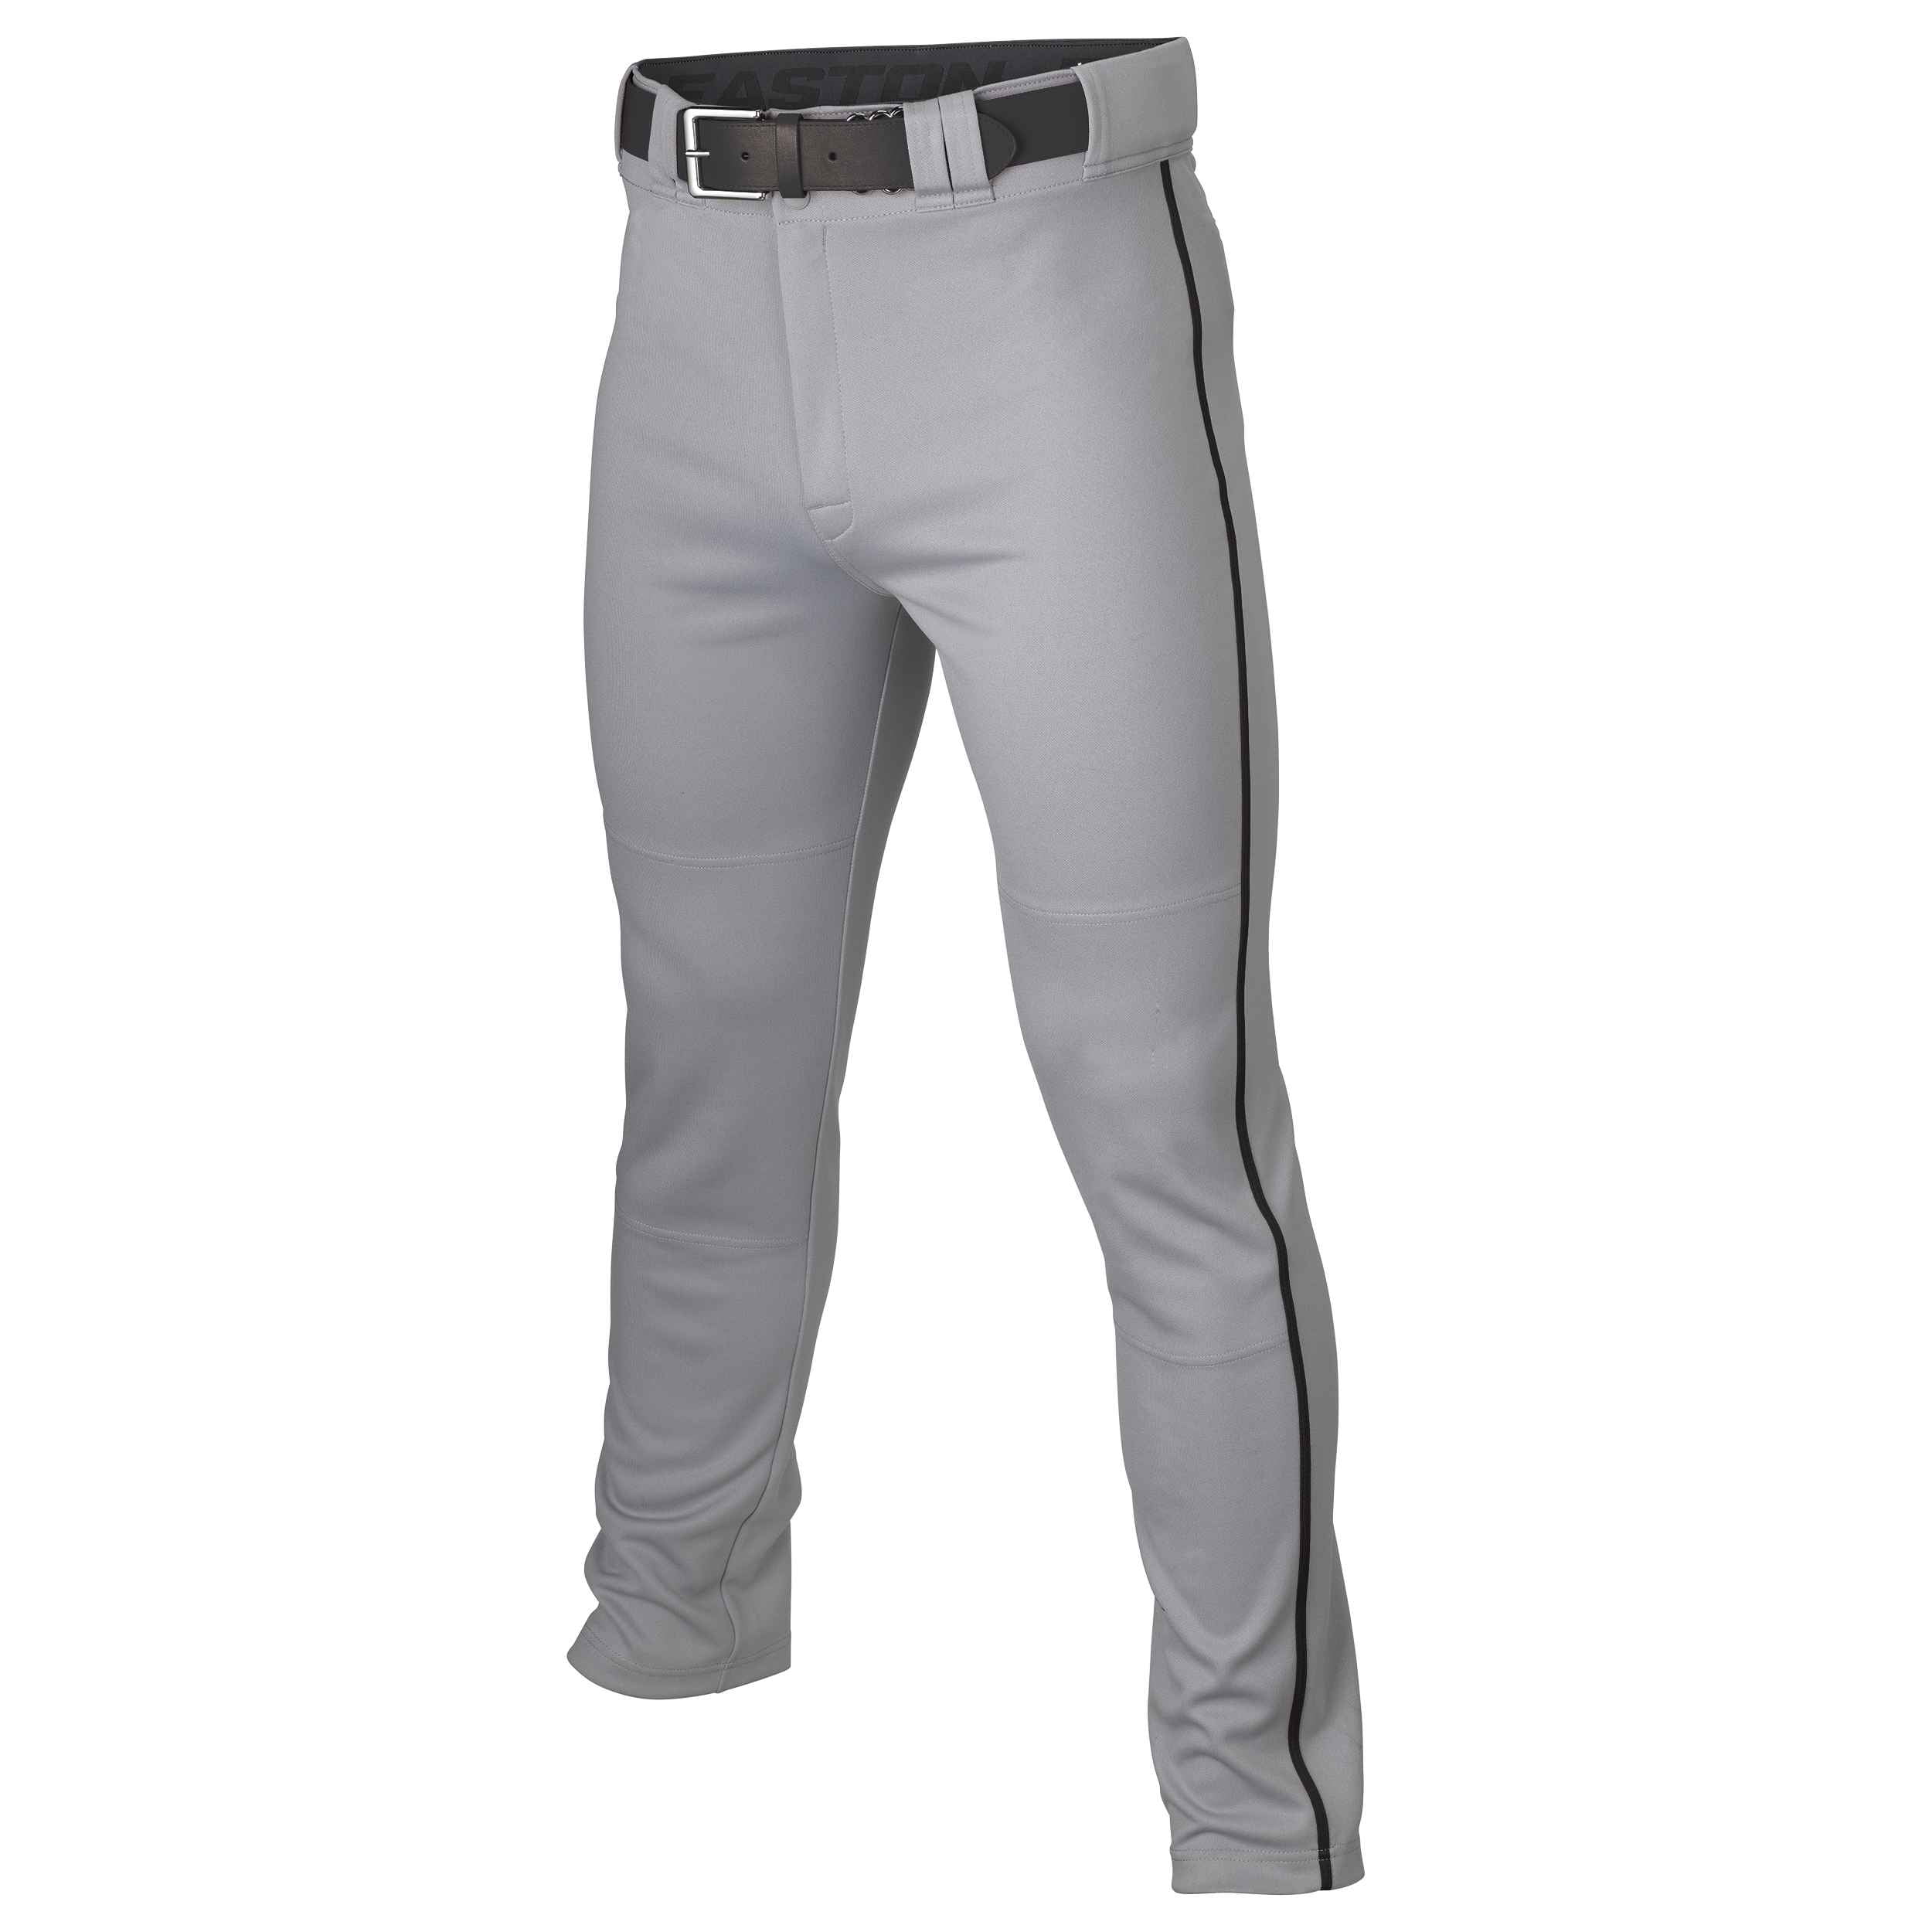 Easton Rival+ Piped Adult Pant, Grey/Red